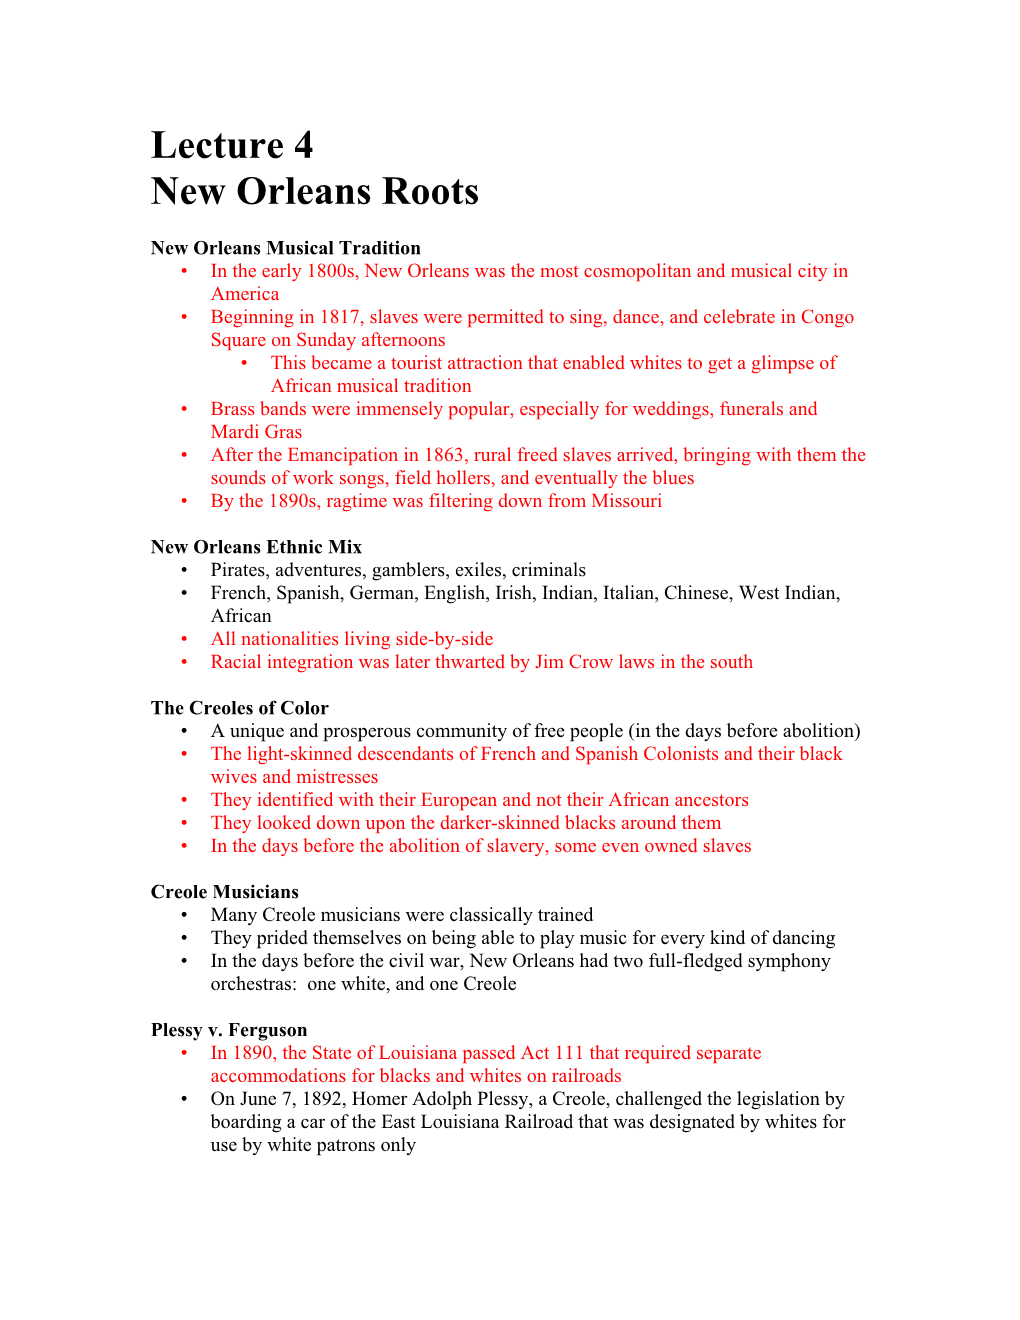 Lecture 4 New Orleans Roots